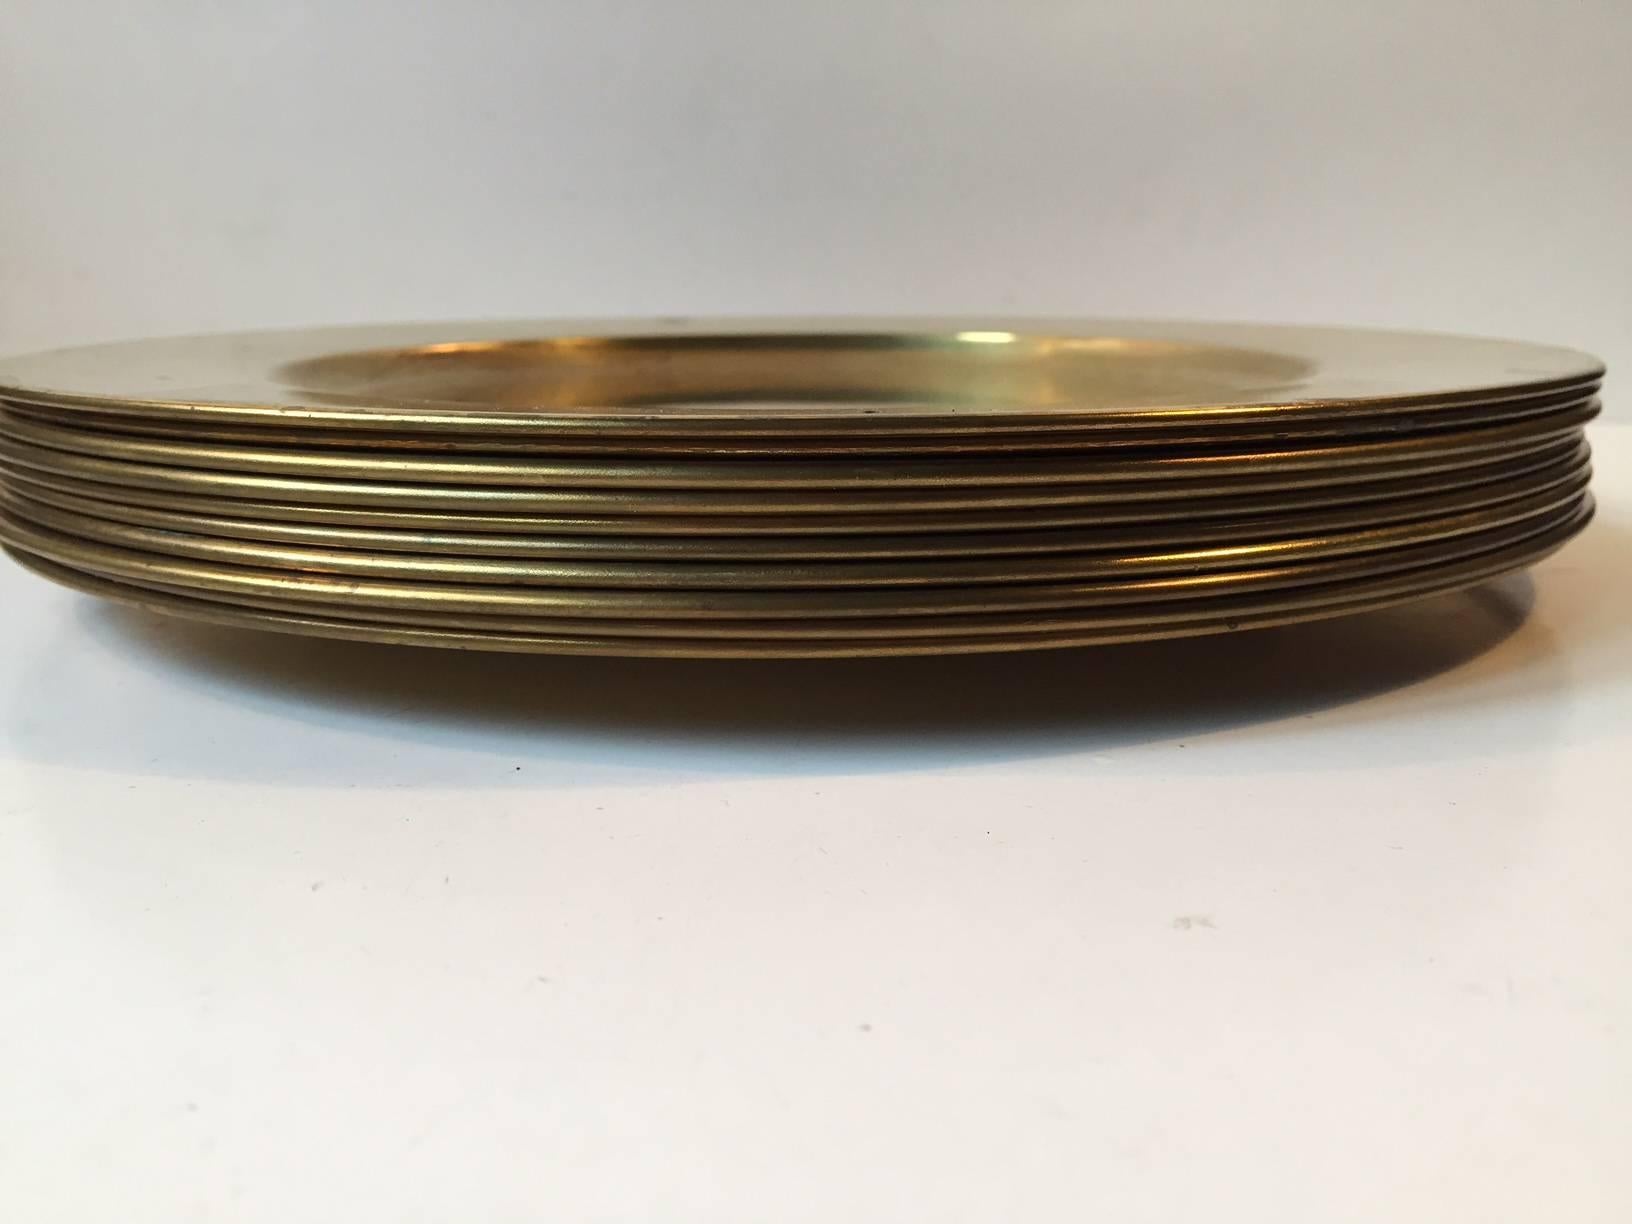 Set of ten cover plates or dishes in solid brass. Manufactured by Stelton in Denmark during the 1970s. The plates are unpolished and shows light ware and patina here and there. You can polish them up to a full shine if you wish. On request the set